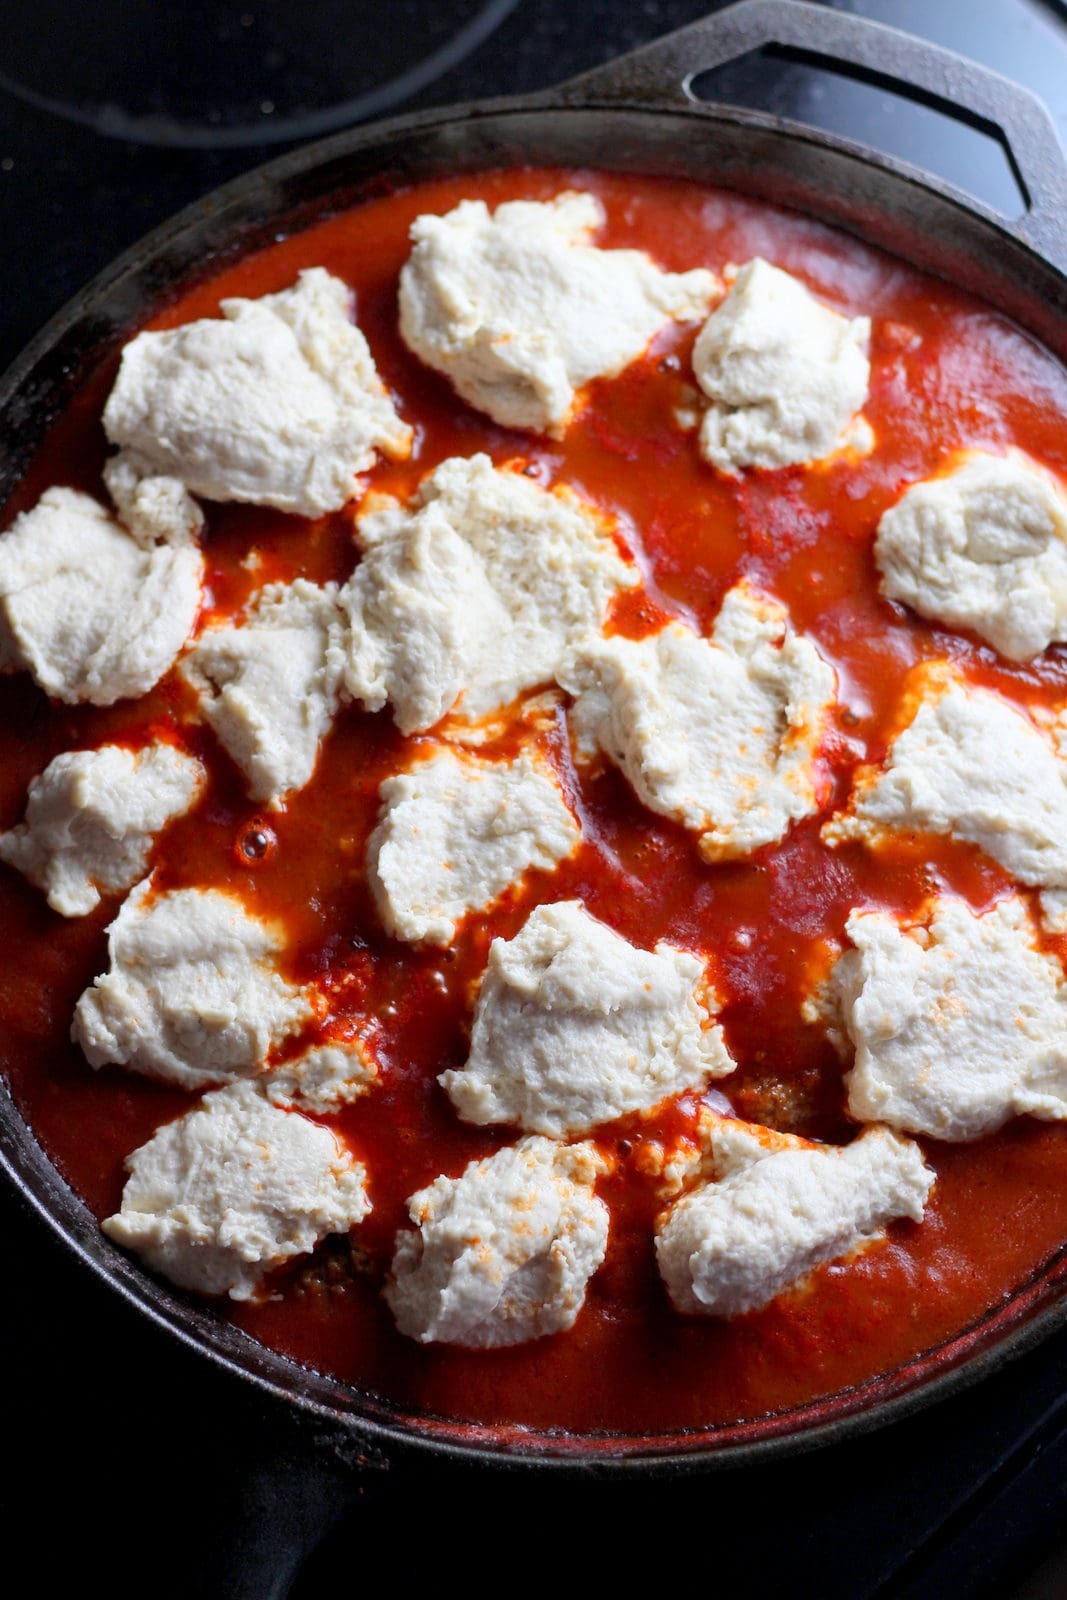 Meatballs and Dumplings - recipe for pillow soft dumplings served with meatballs simmered in tomato sauce. Perfect recipe for a weeknight meal! thewoodenskillet.com 